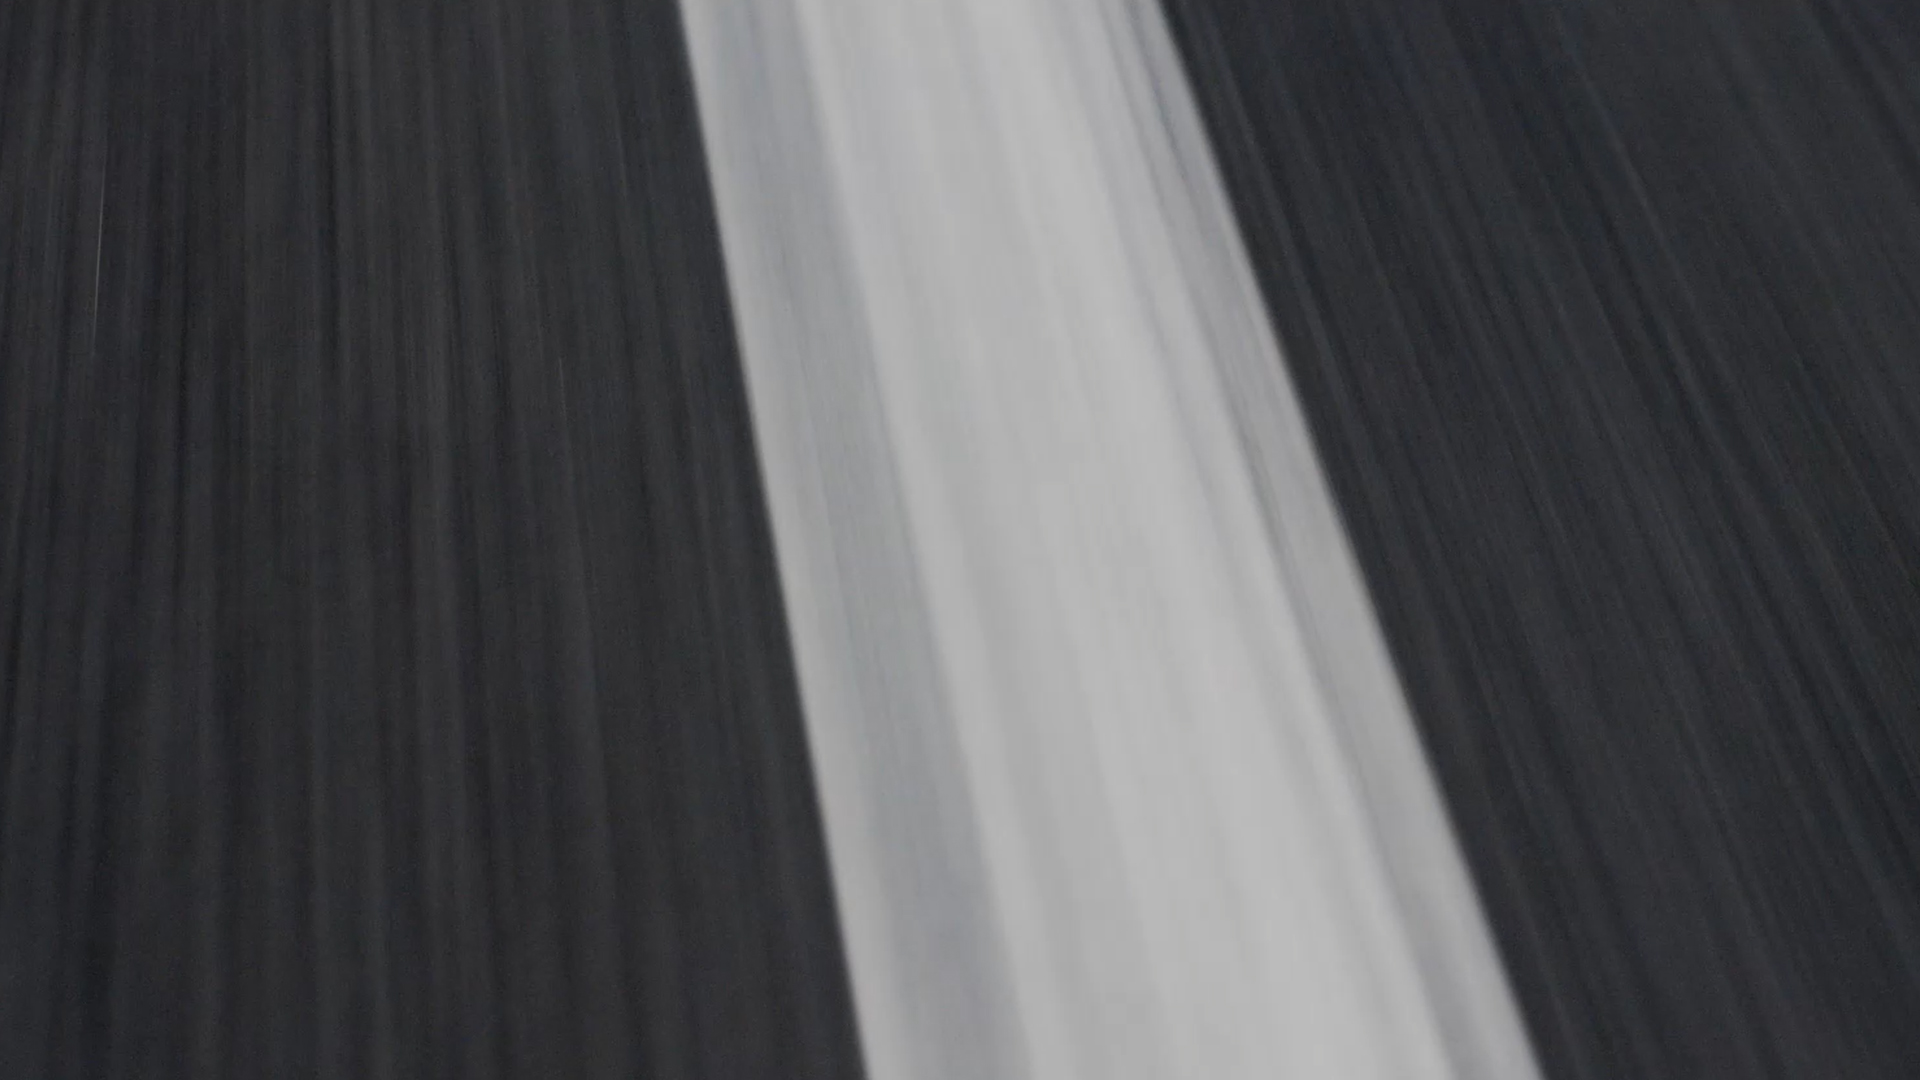 Still from the VANDAL produced Audi Choice TVC featuring a motion blurred white line of a road